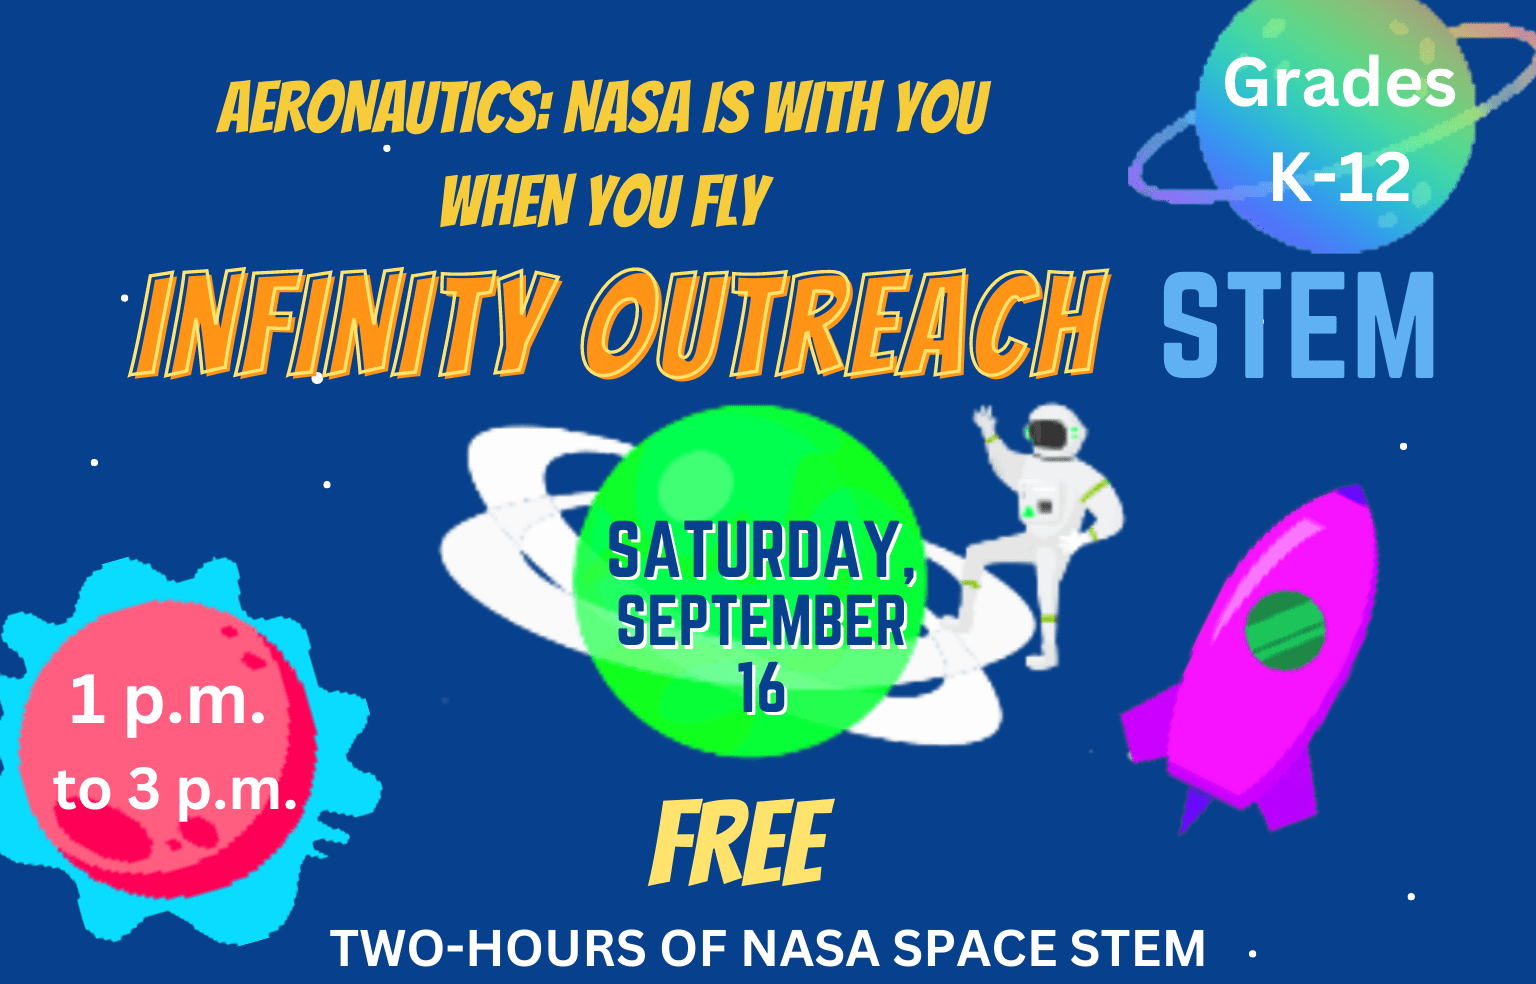 The flyer for the infinity outreach stem.